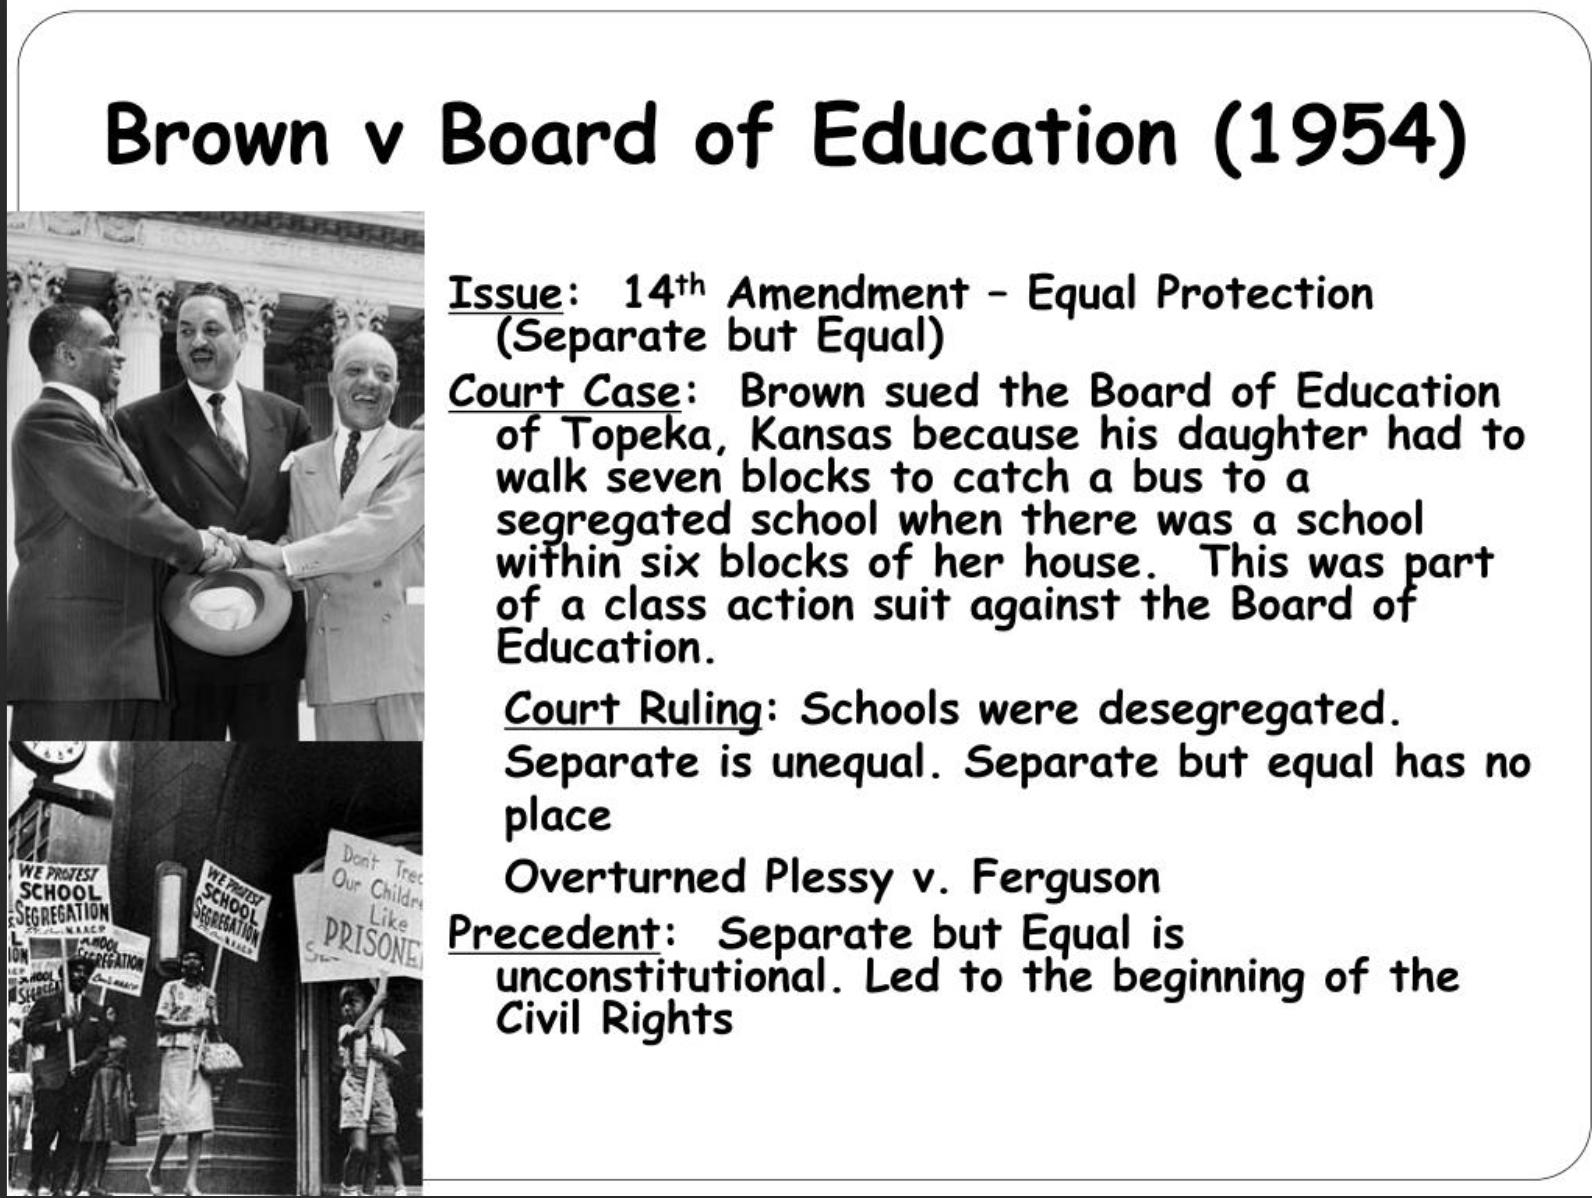 Image with information about the court case Brown vs. Board of Education